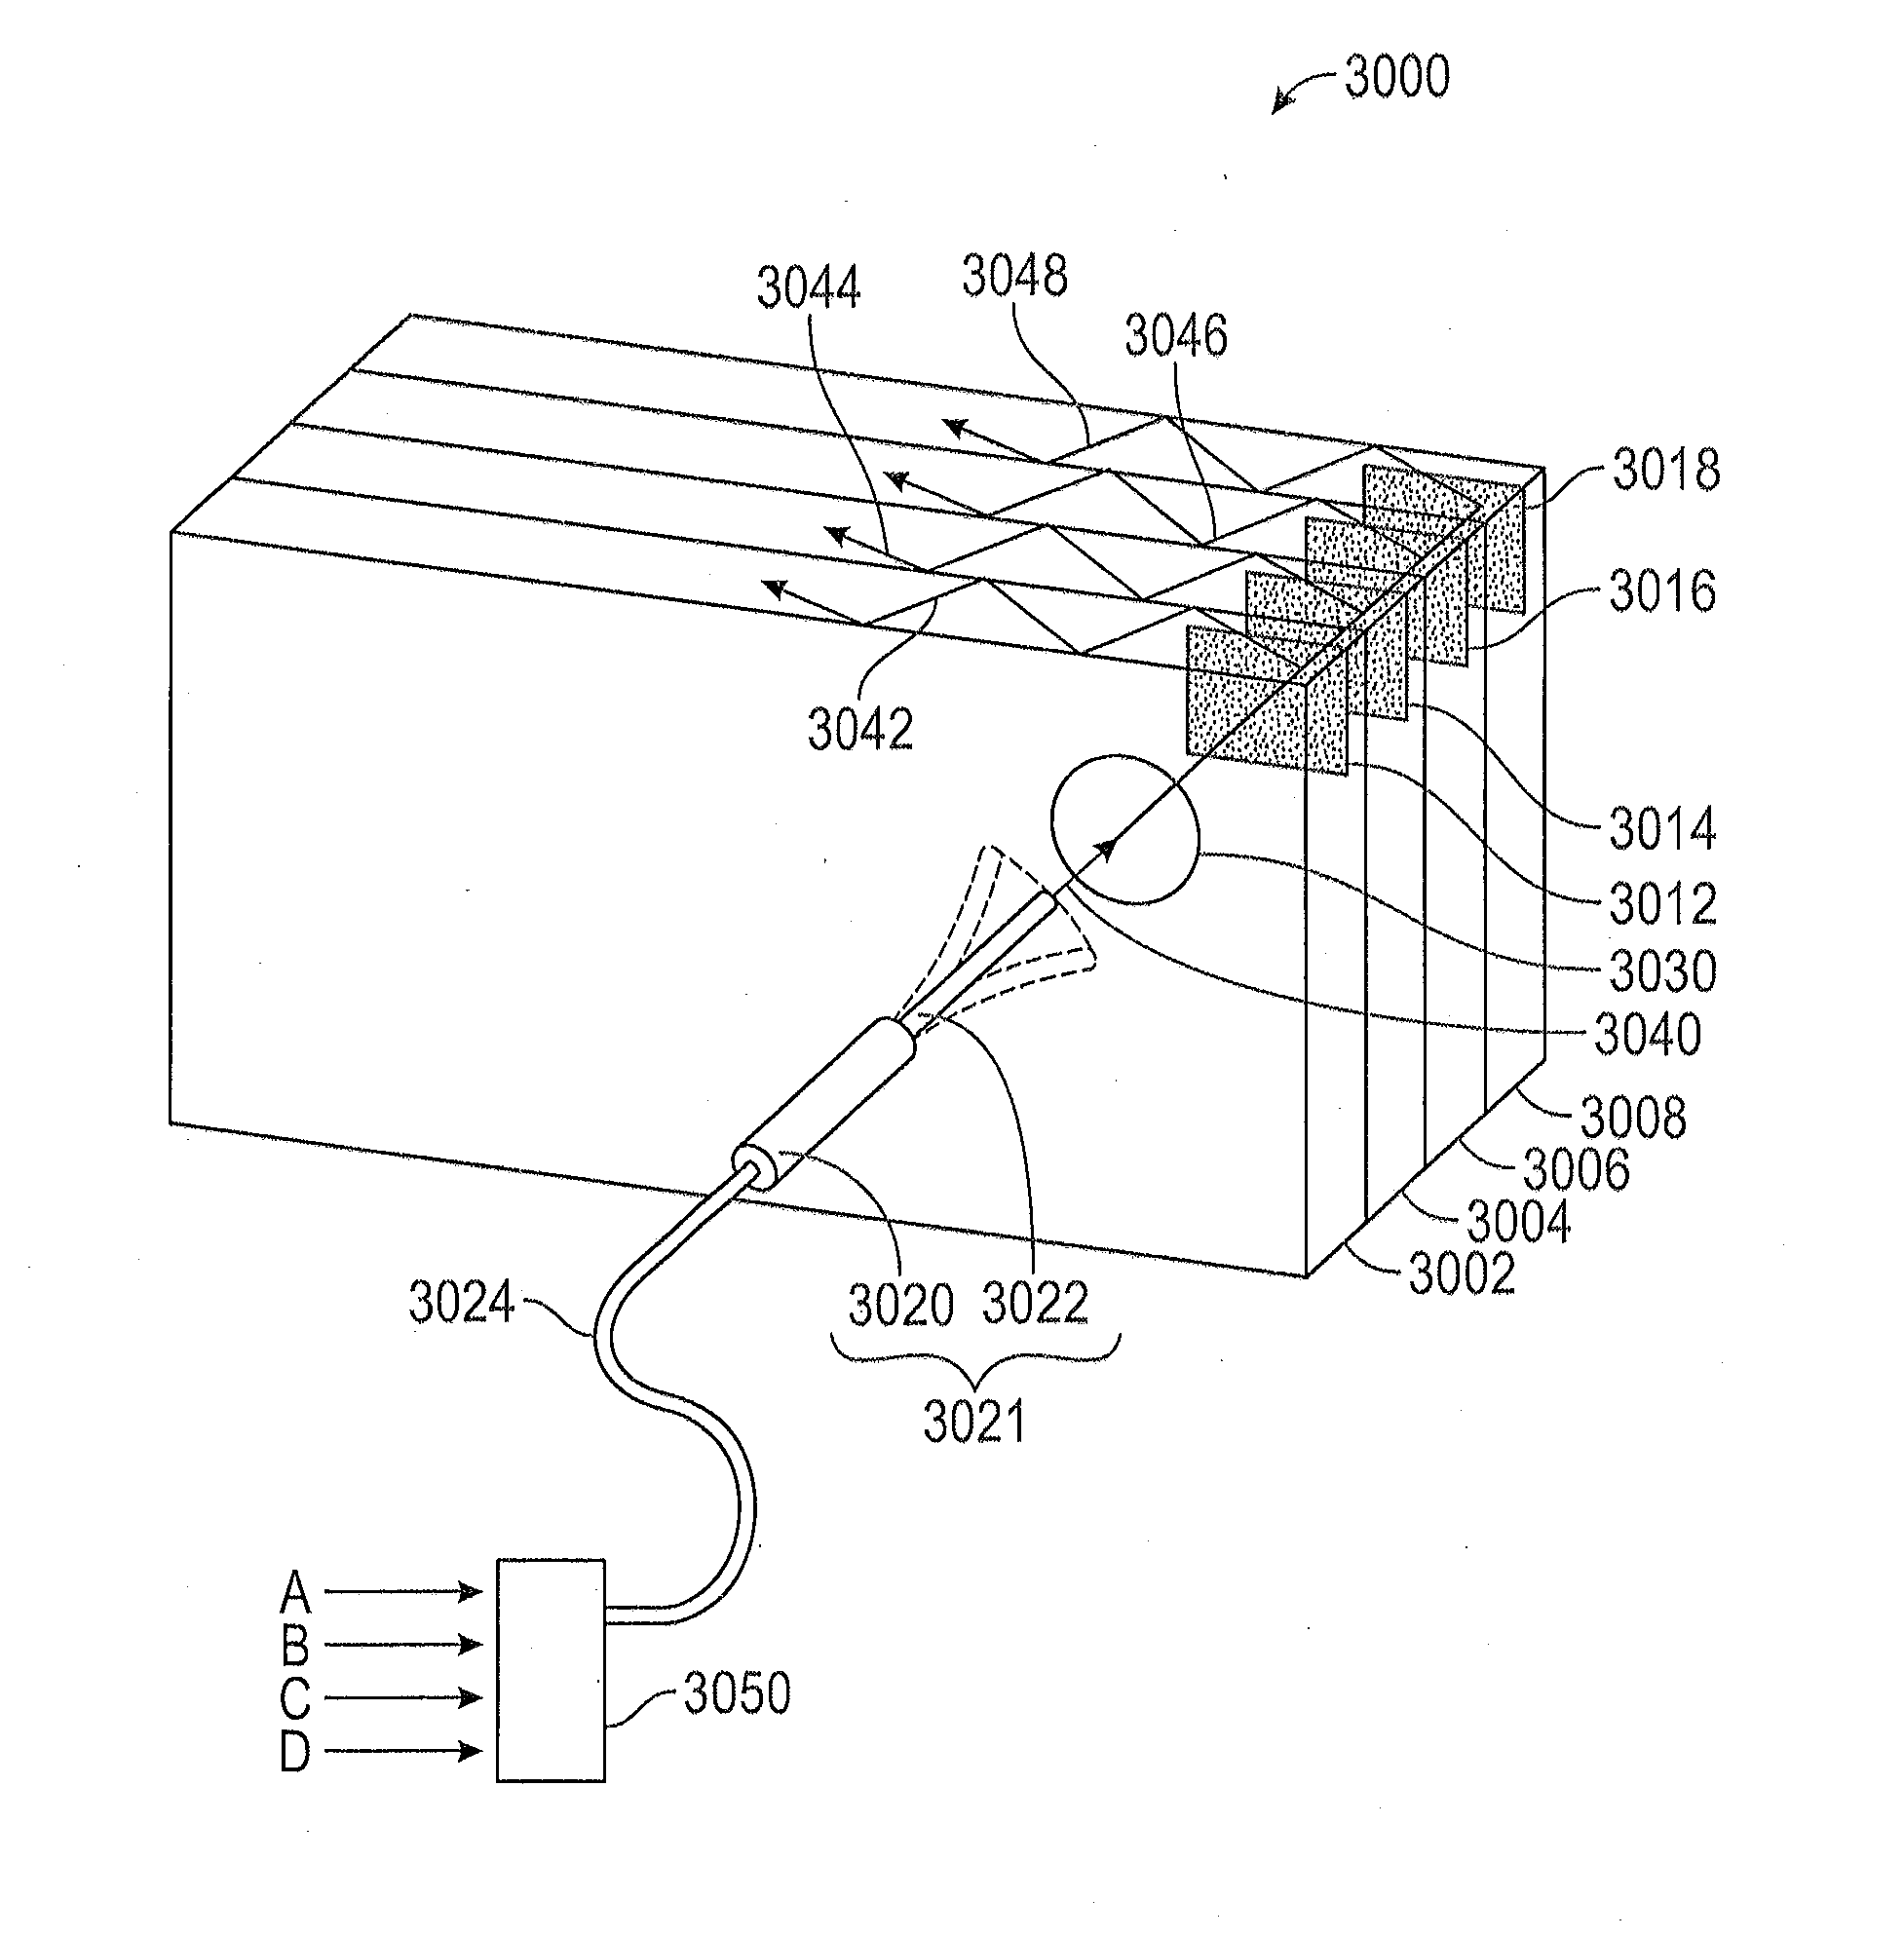 Display system with optical elements for in-coupling multiplexed light streams